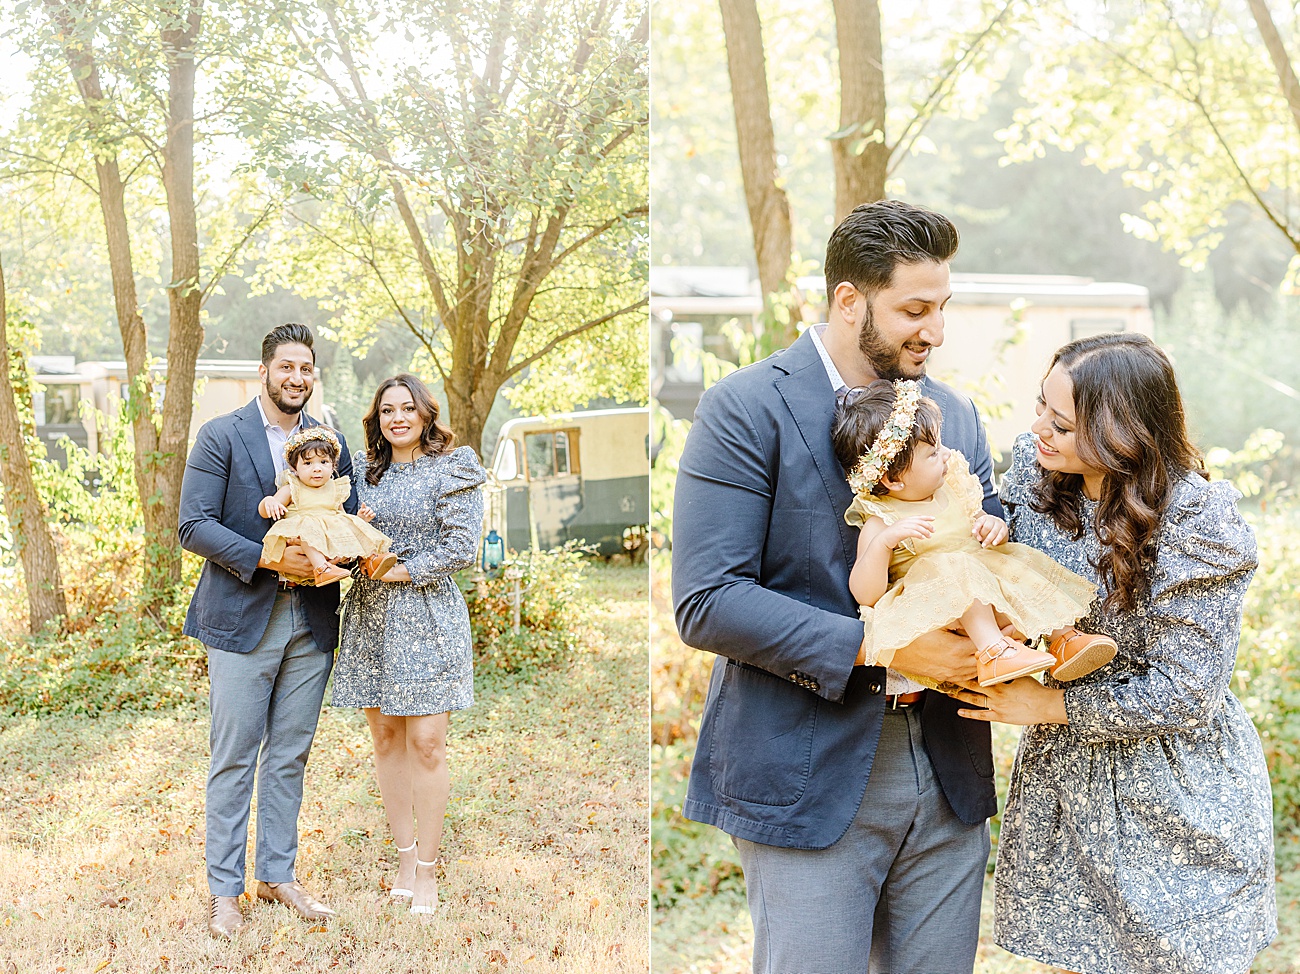 Unique location for family photos in Austin, Texas as family celebrates first birthday for little girl. Photo by Sana Ahmed Photography